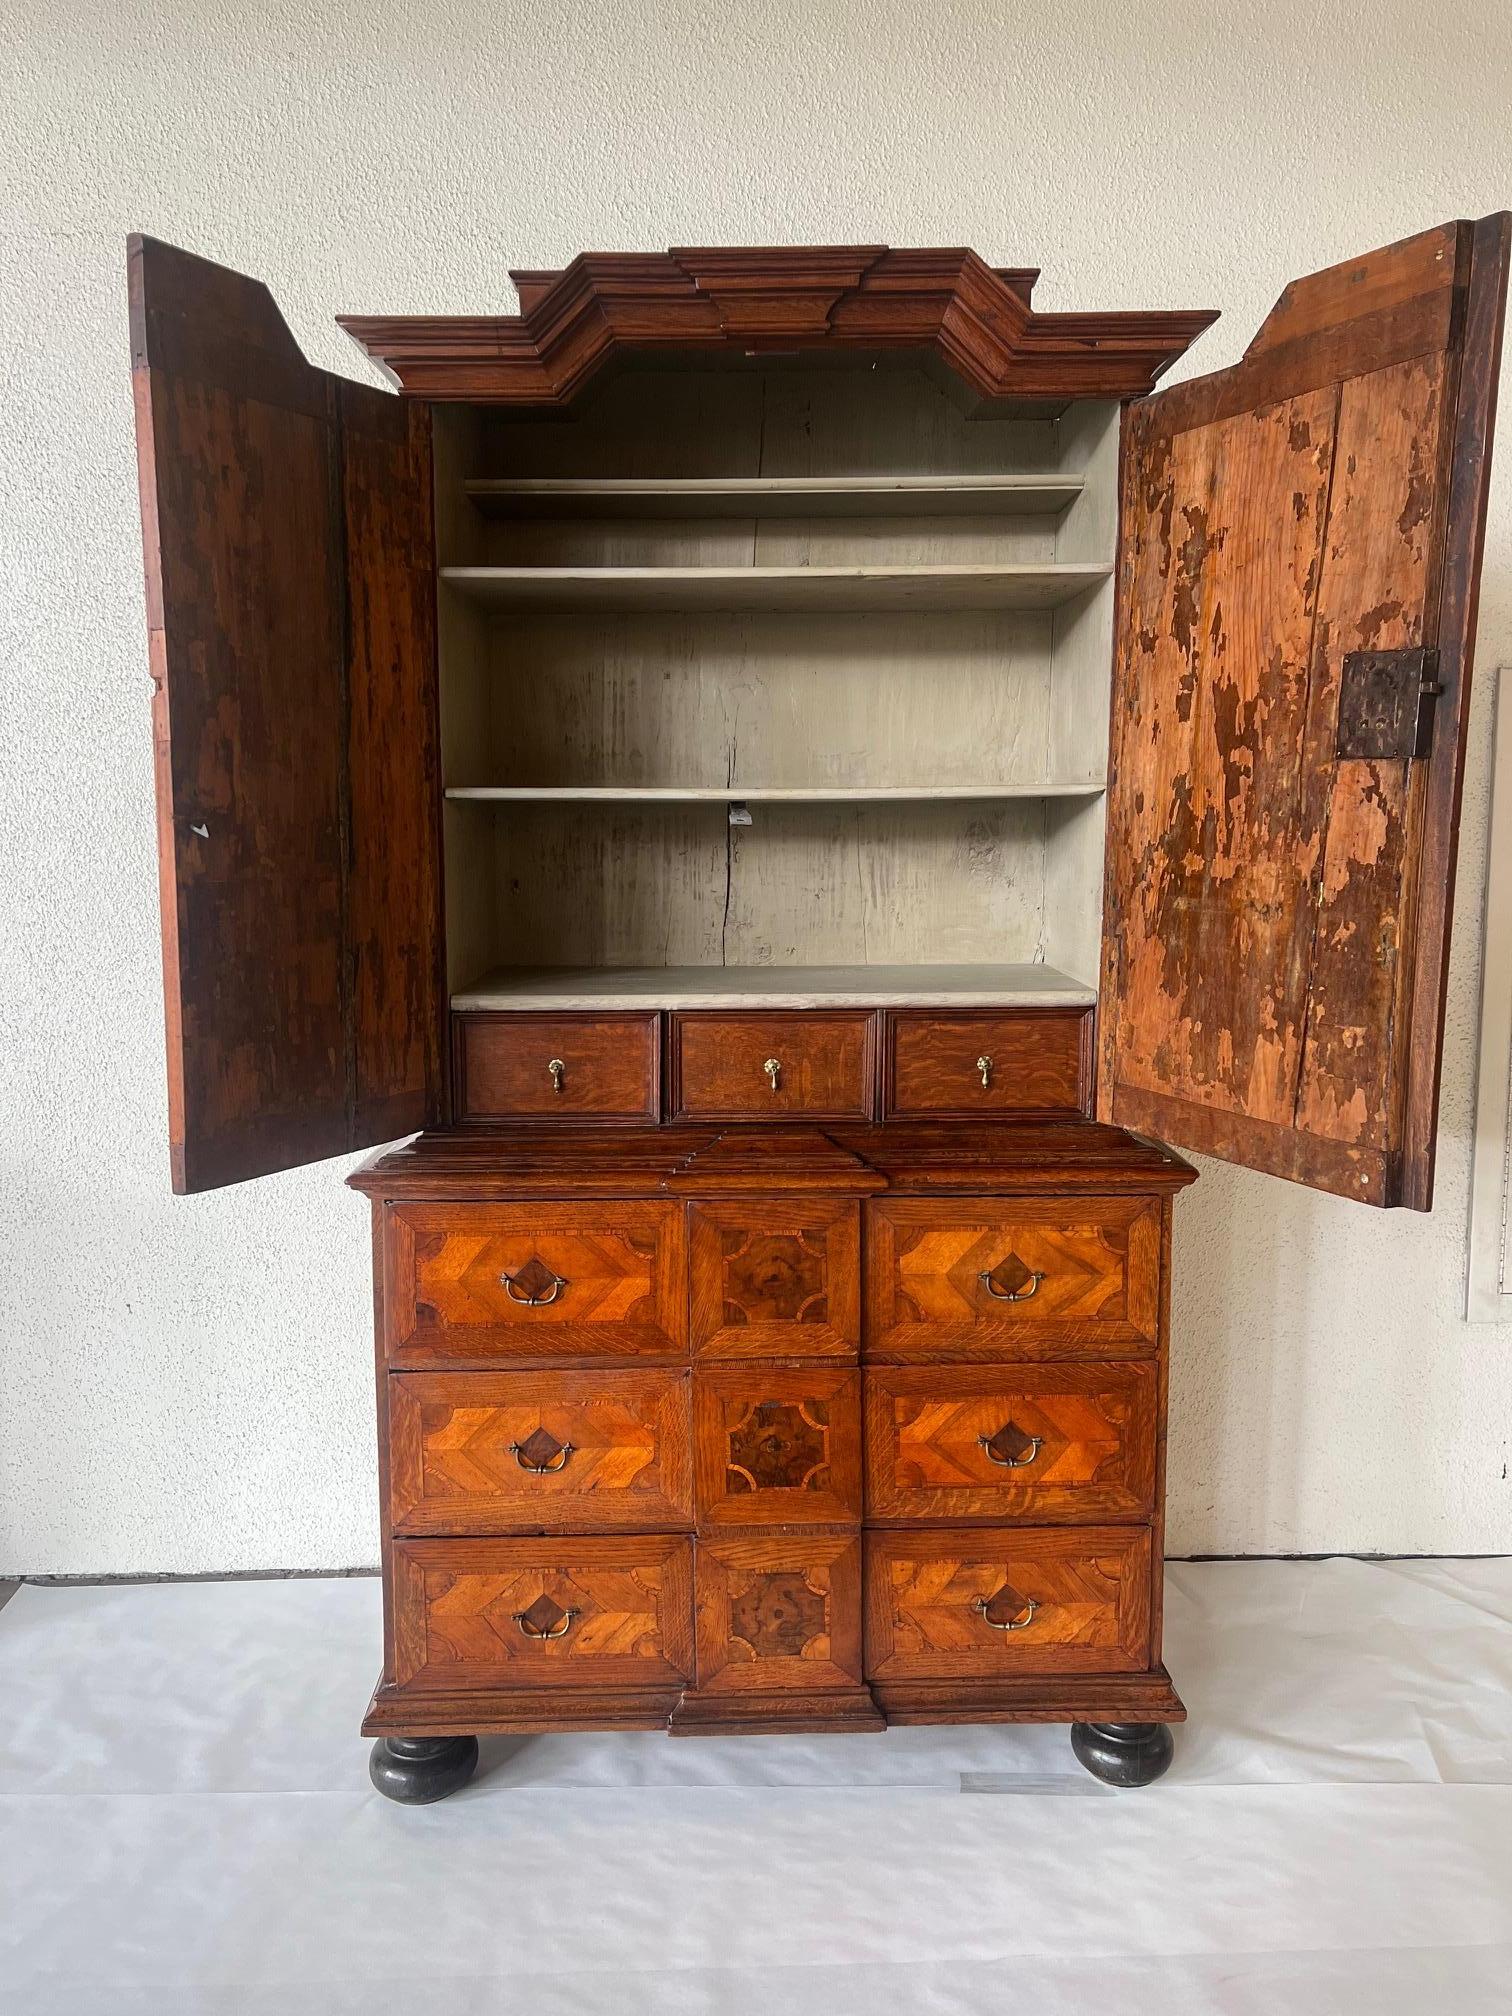 Two piece antique Dutch cabinet crafted from walnut and mahogany and newly restored. This three drawer chest offers up plenty of storage while also serving up style. Painted inside with shelving.